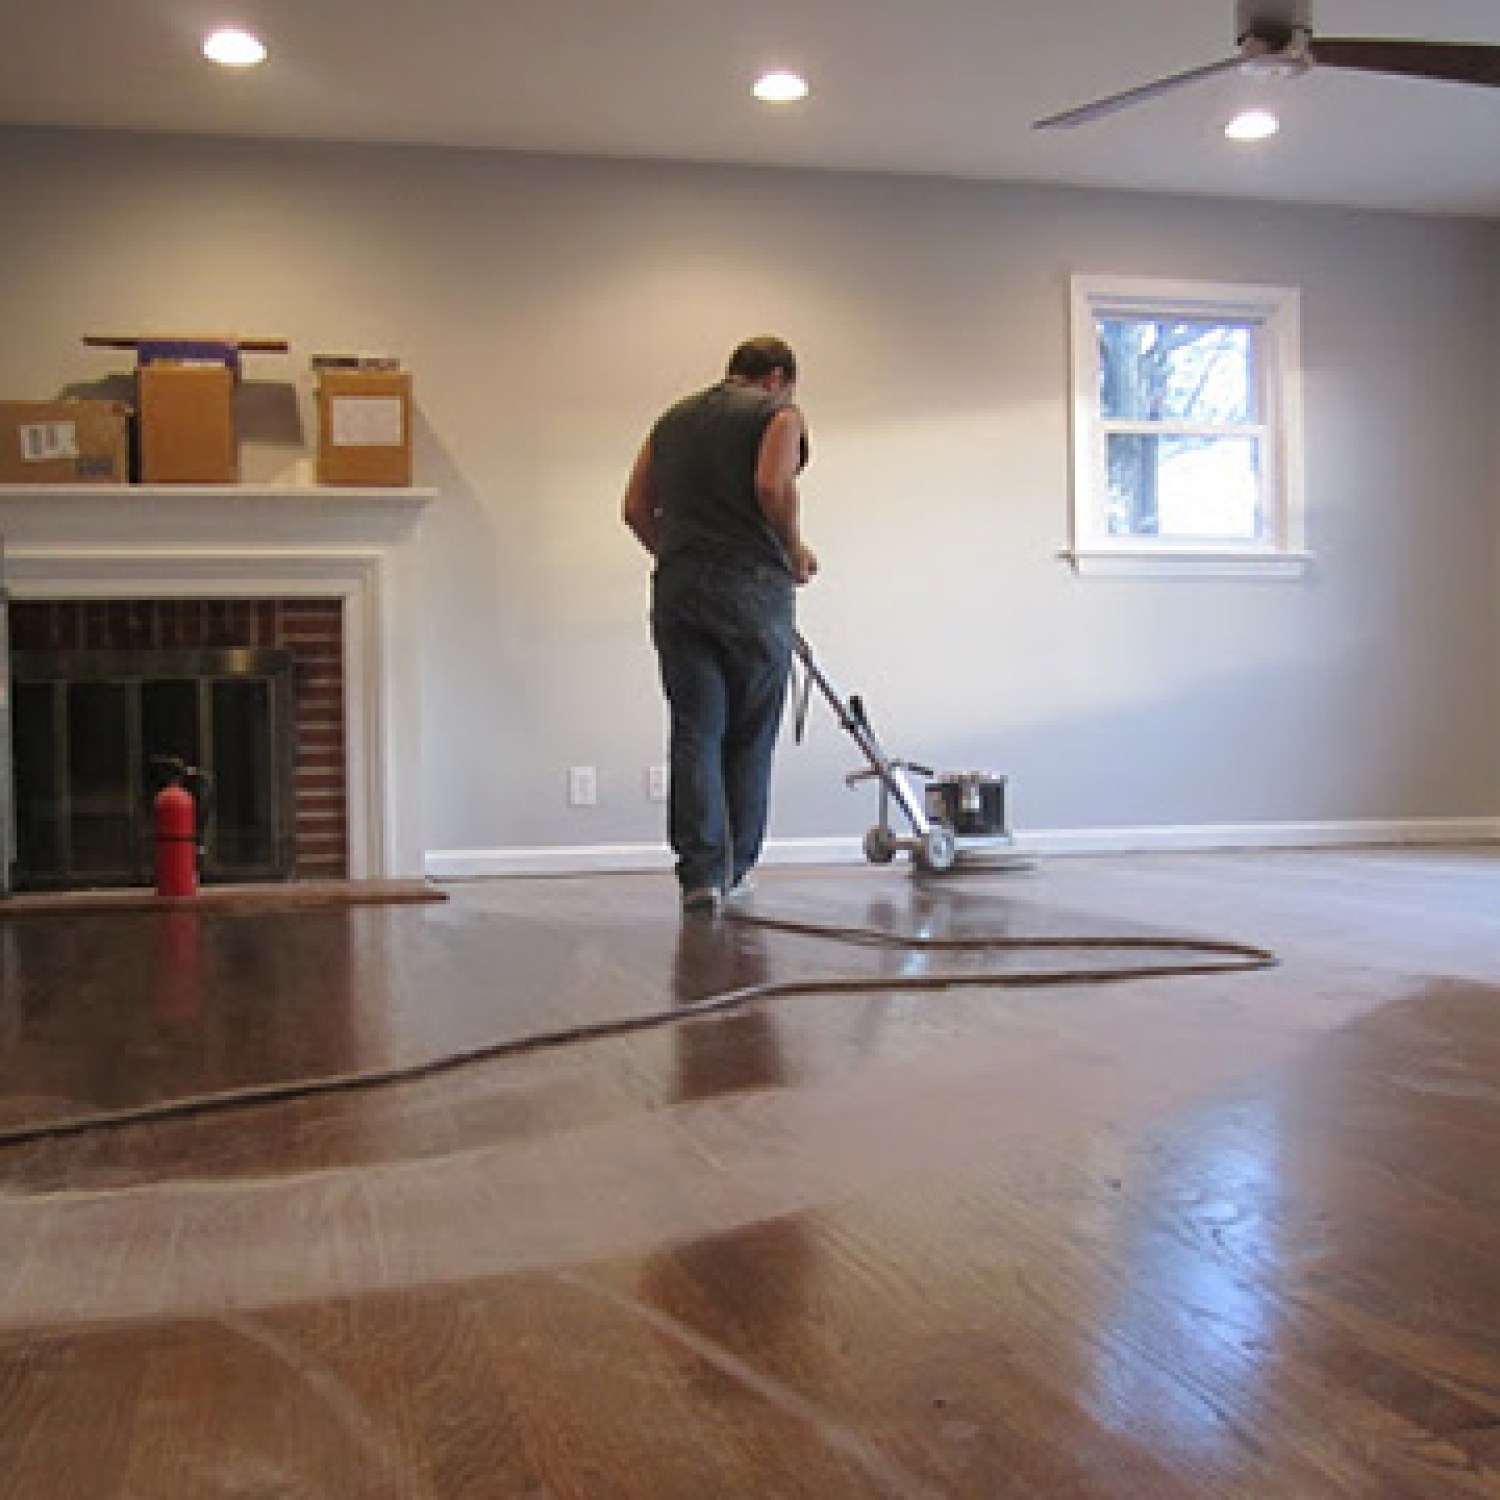 Refinishing Hardwood Floors Diy Wood, How Much Does It Cost To Clean And Polish Hardwood Floors